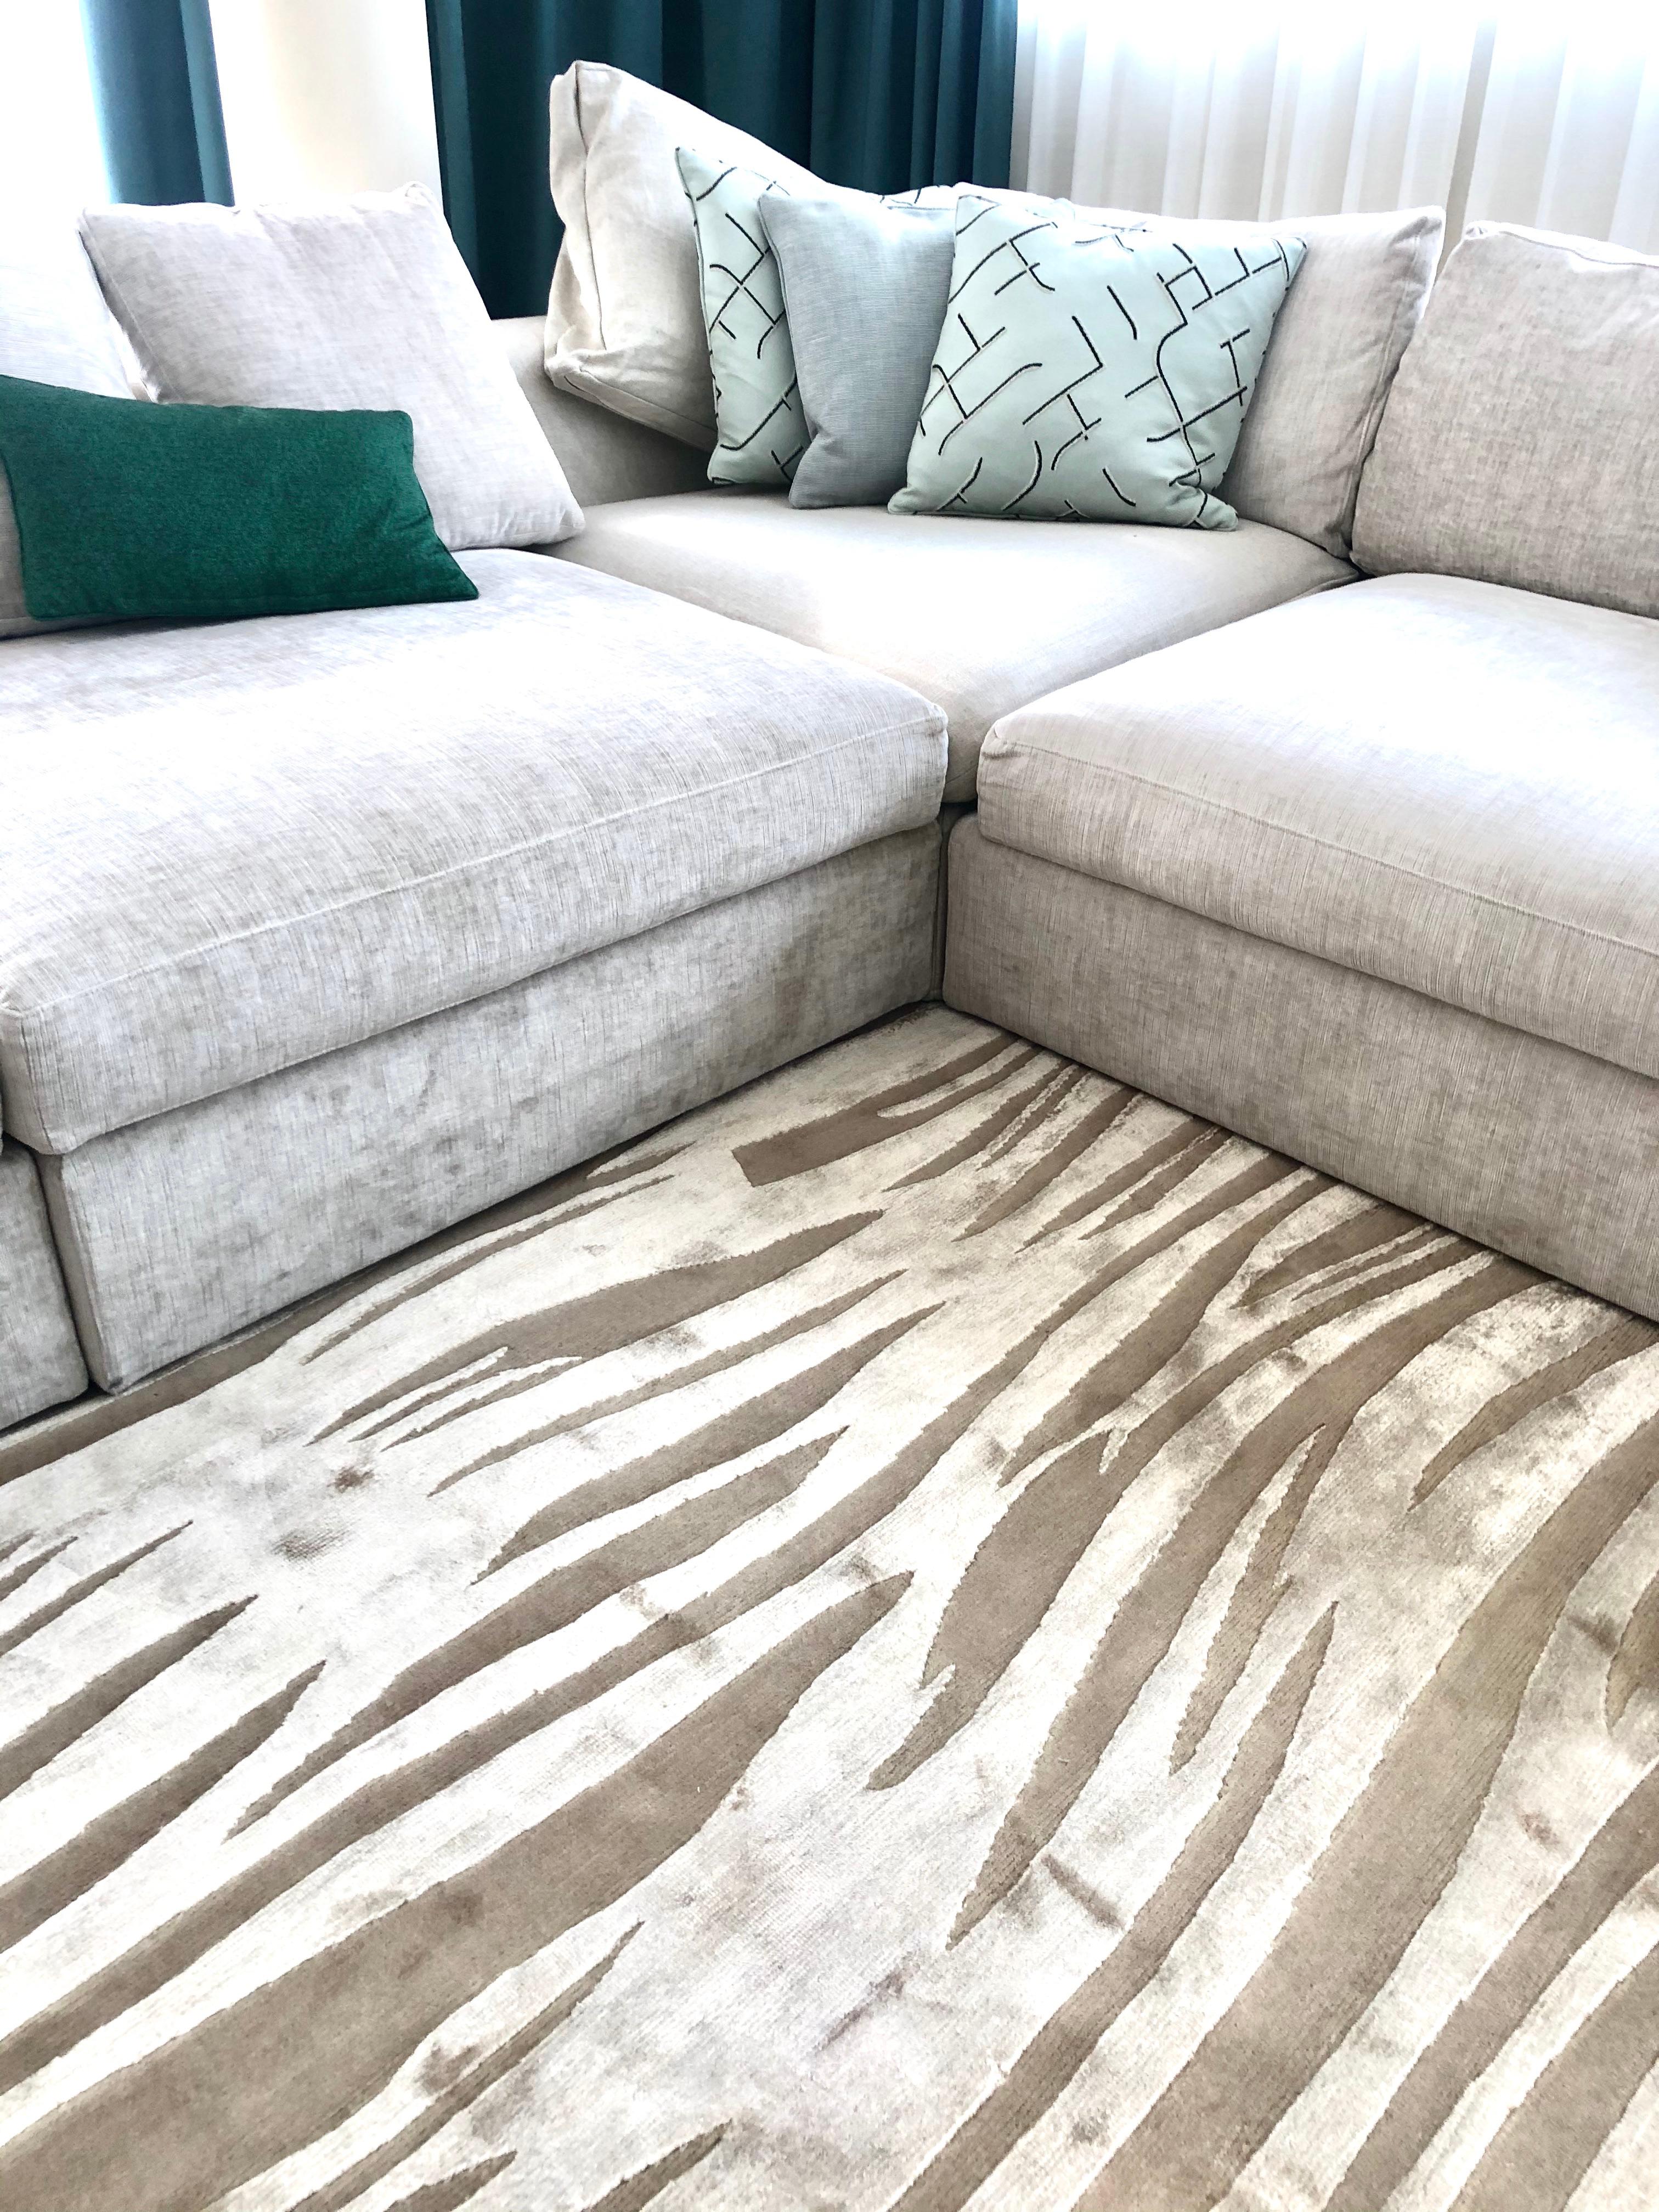 Random minimal waves enrich the surface of this elegant design.
This rug is hand knotted in Nepal by our artisans by using 50% silk and 50% fine Himalayan wool dyed using vegetable and mineral pigments. The base is 5 mm high, while the design is 7